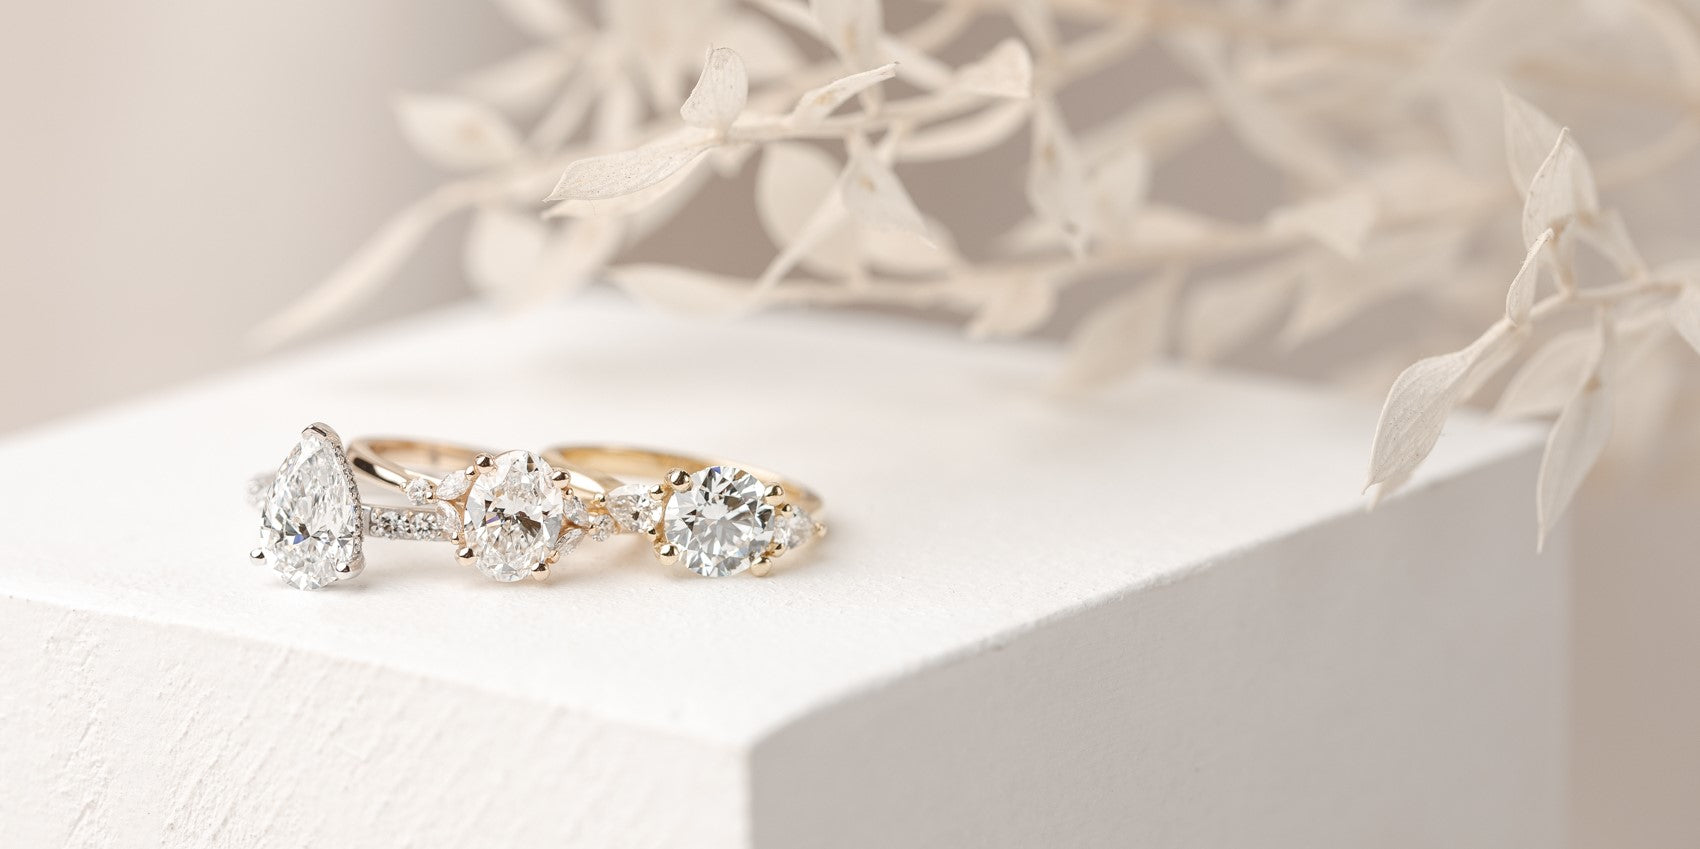 22 Raw, Rustic, and Rough Diamond Engagement Rings